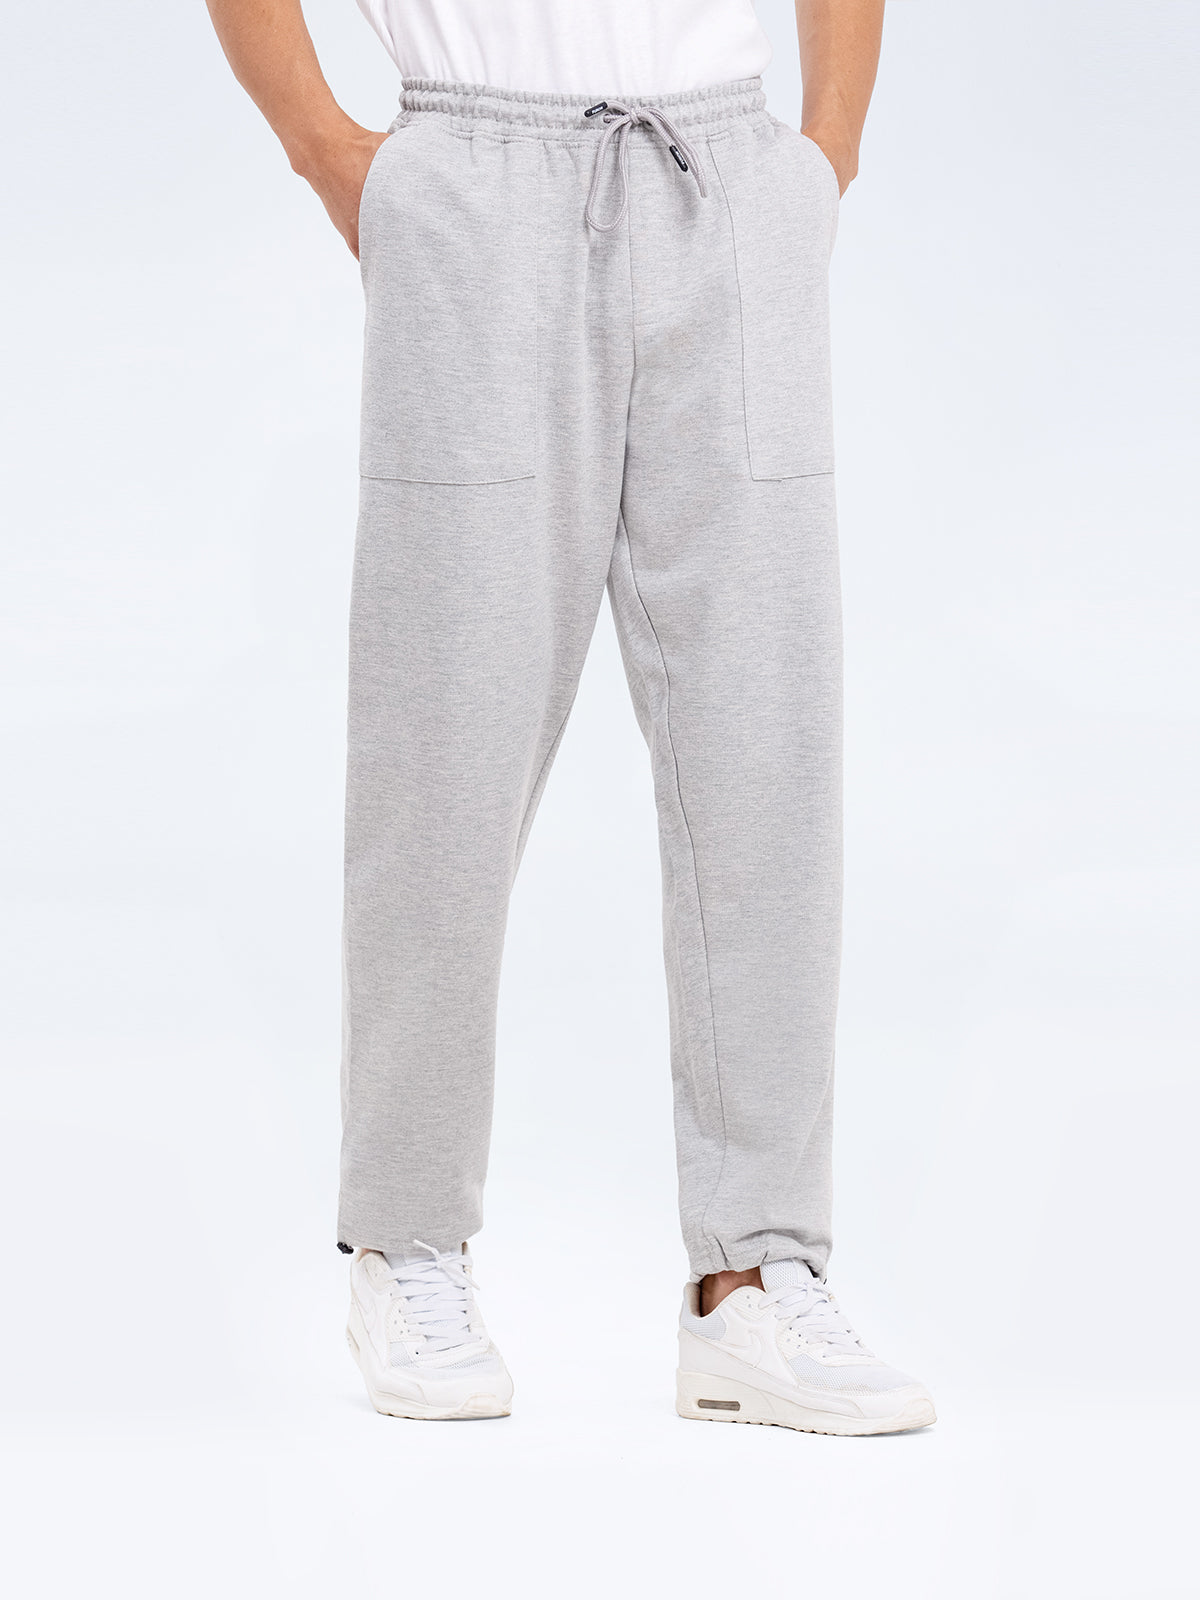 French Terry Joggers - FMBT24-016